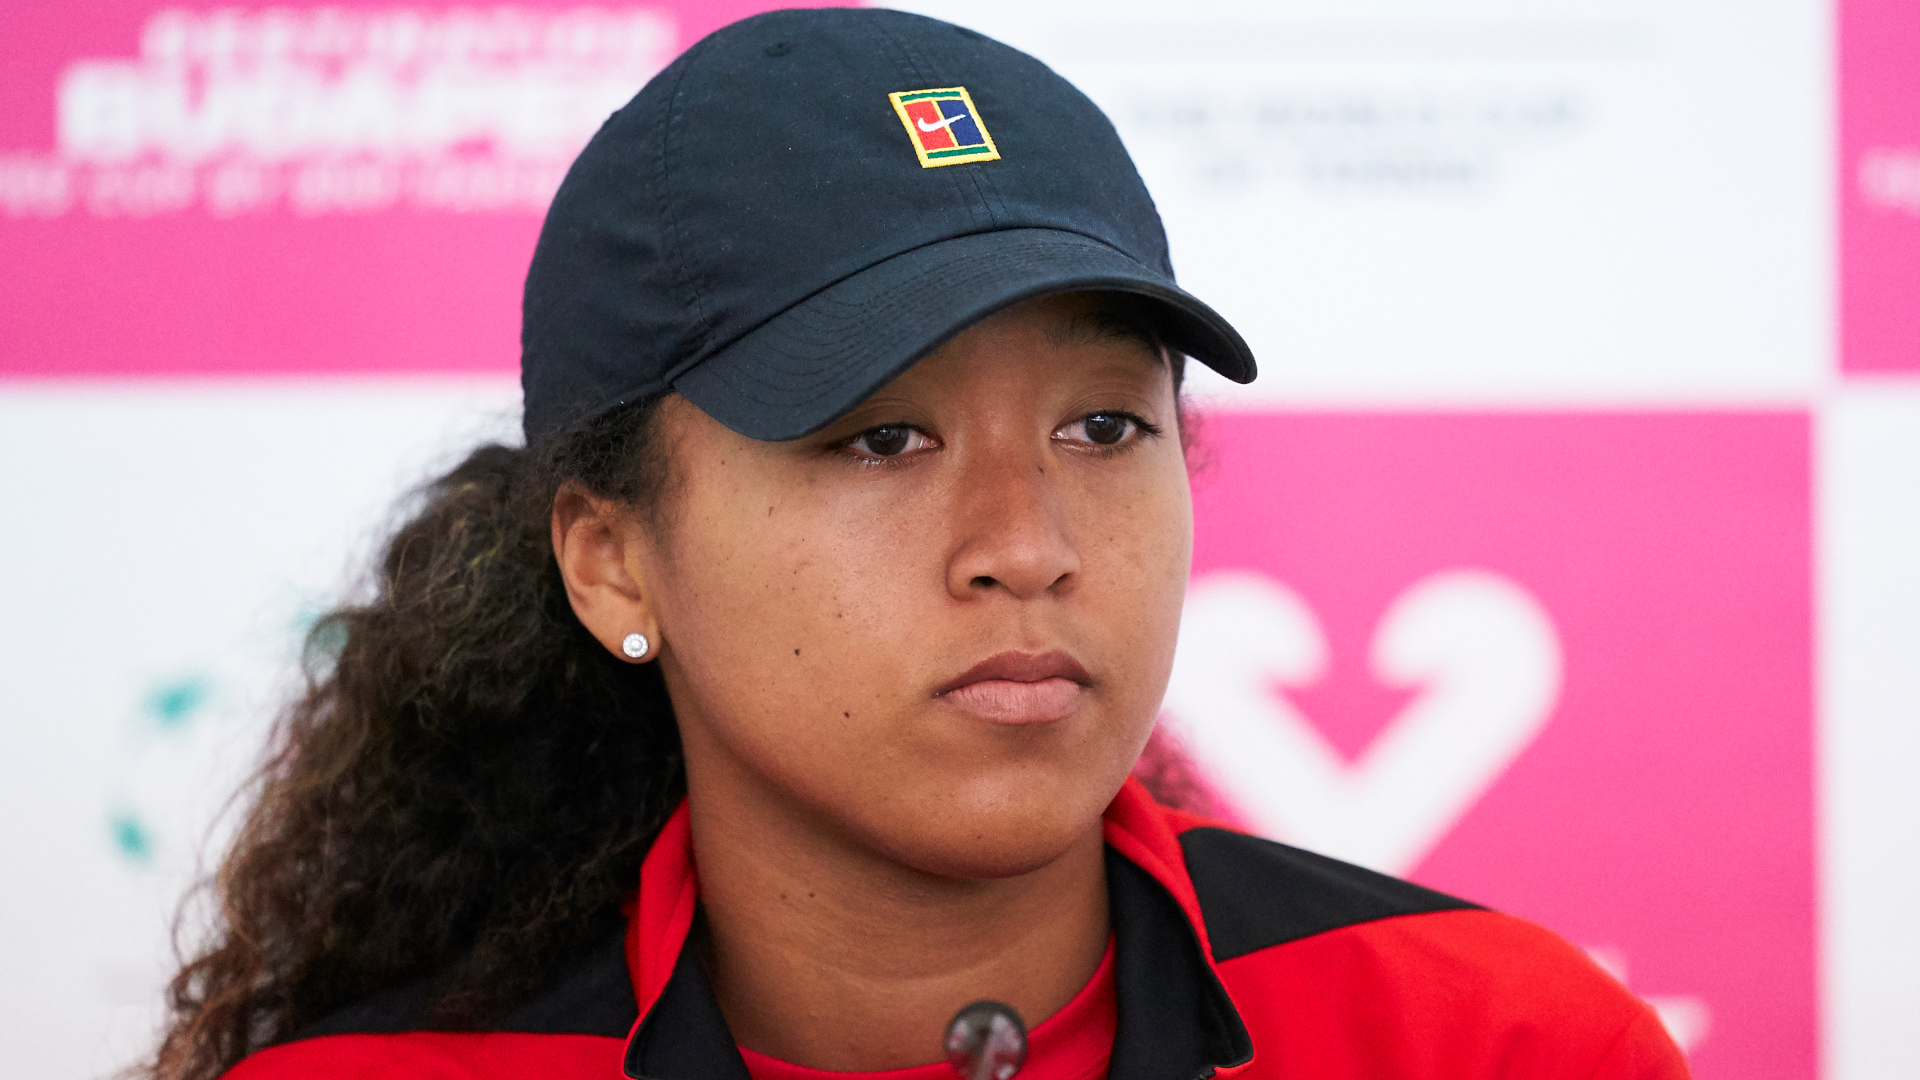 World number two Naomi Osaka broke down in tears during a Western and Southern news conference in Cincinnati on Monday.